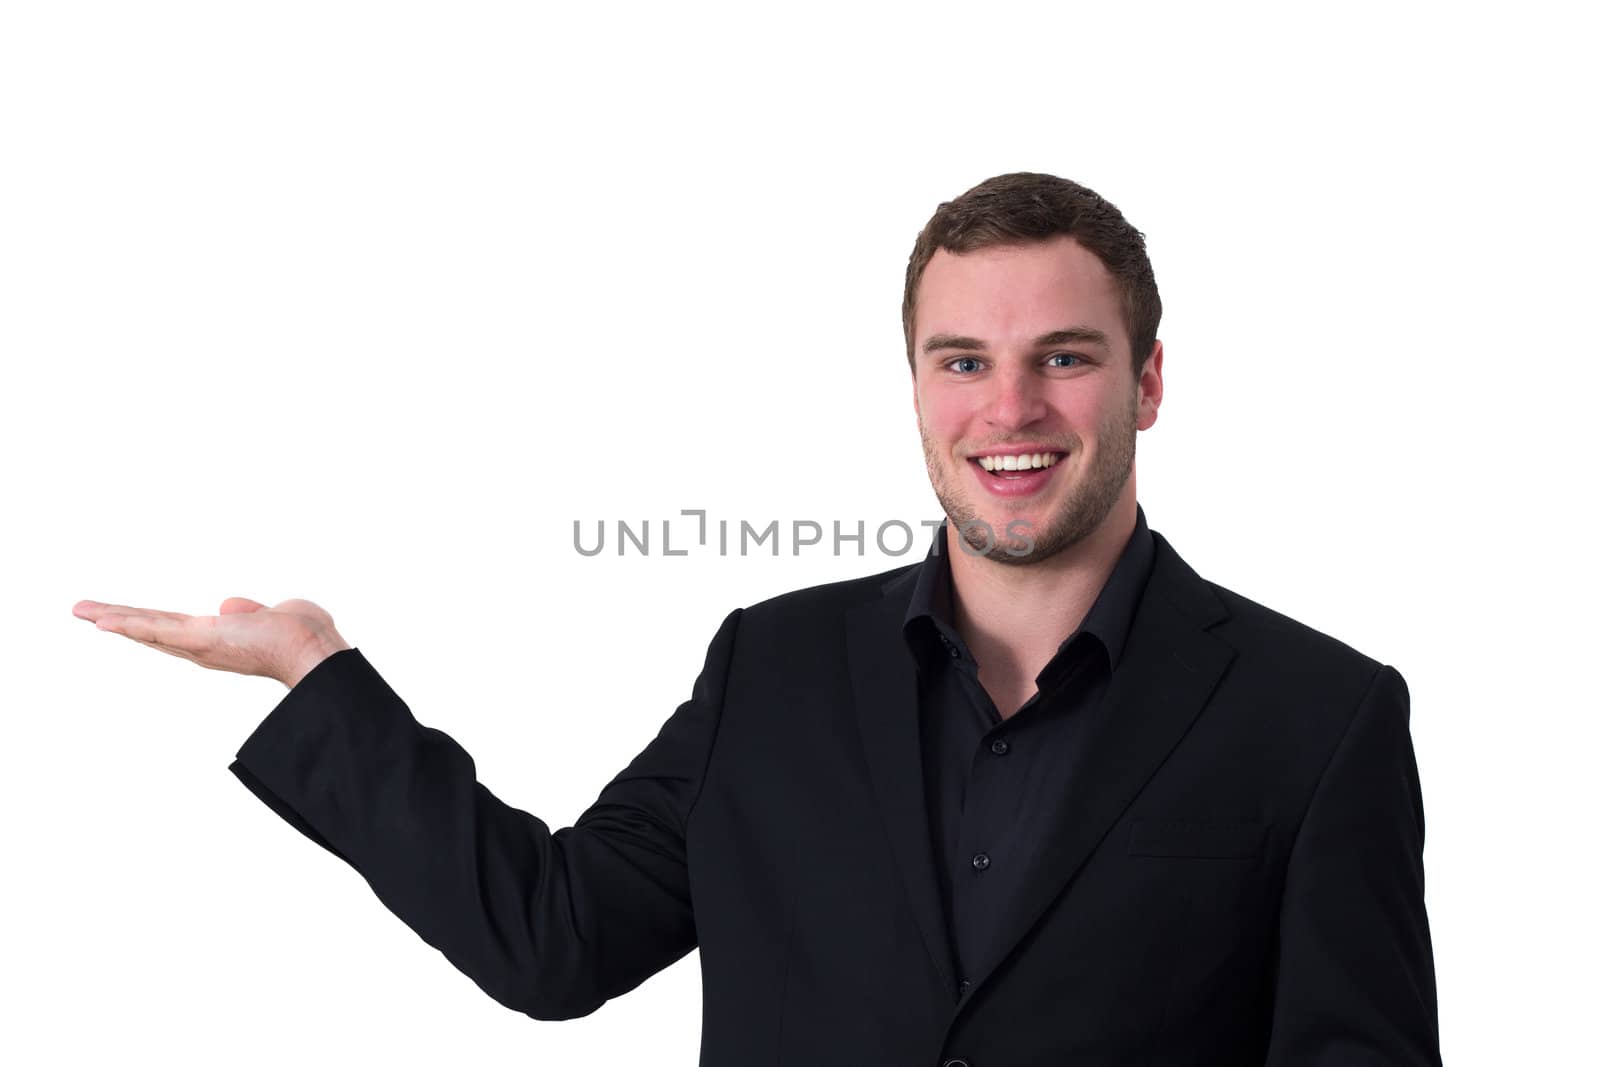 Man showing and advertising isolated space while smiling sympathetic